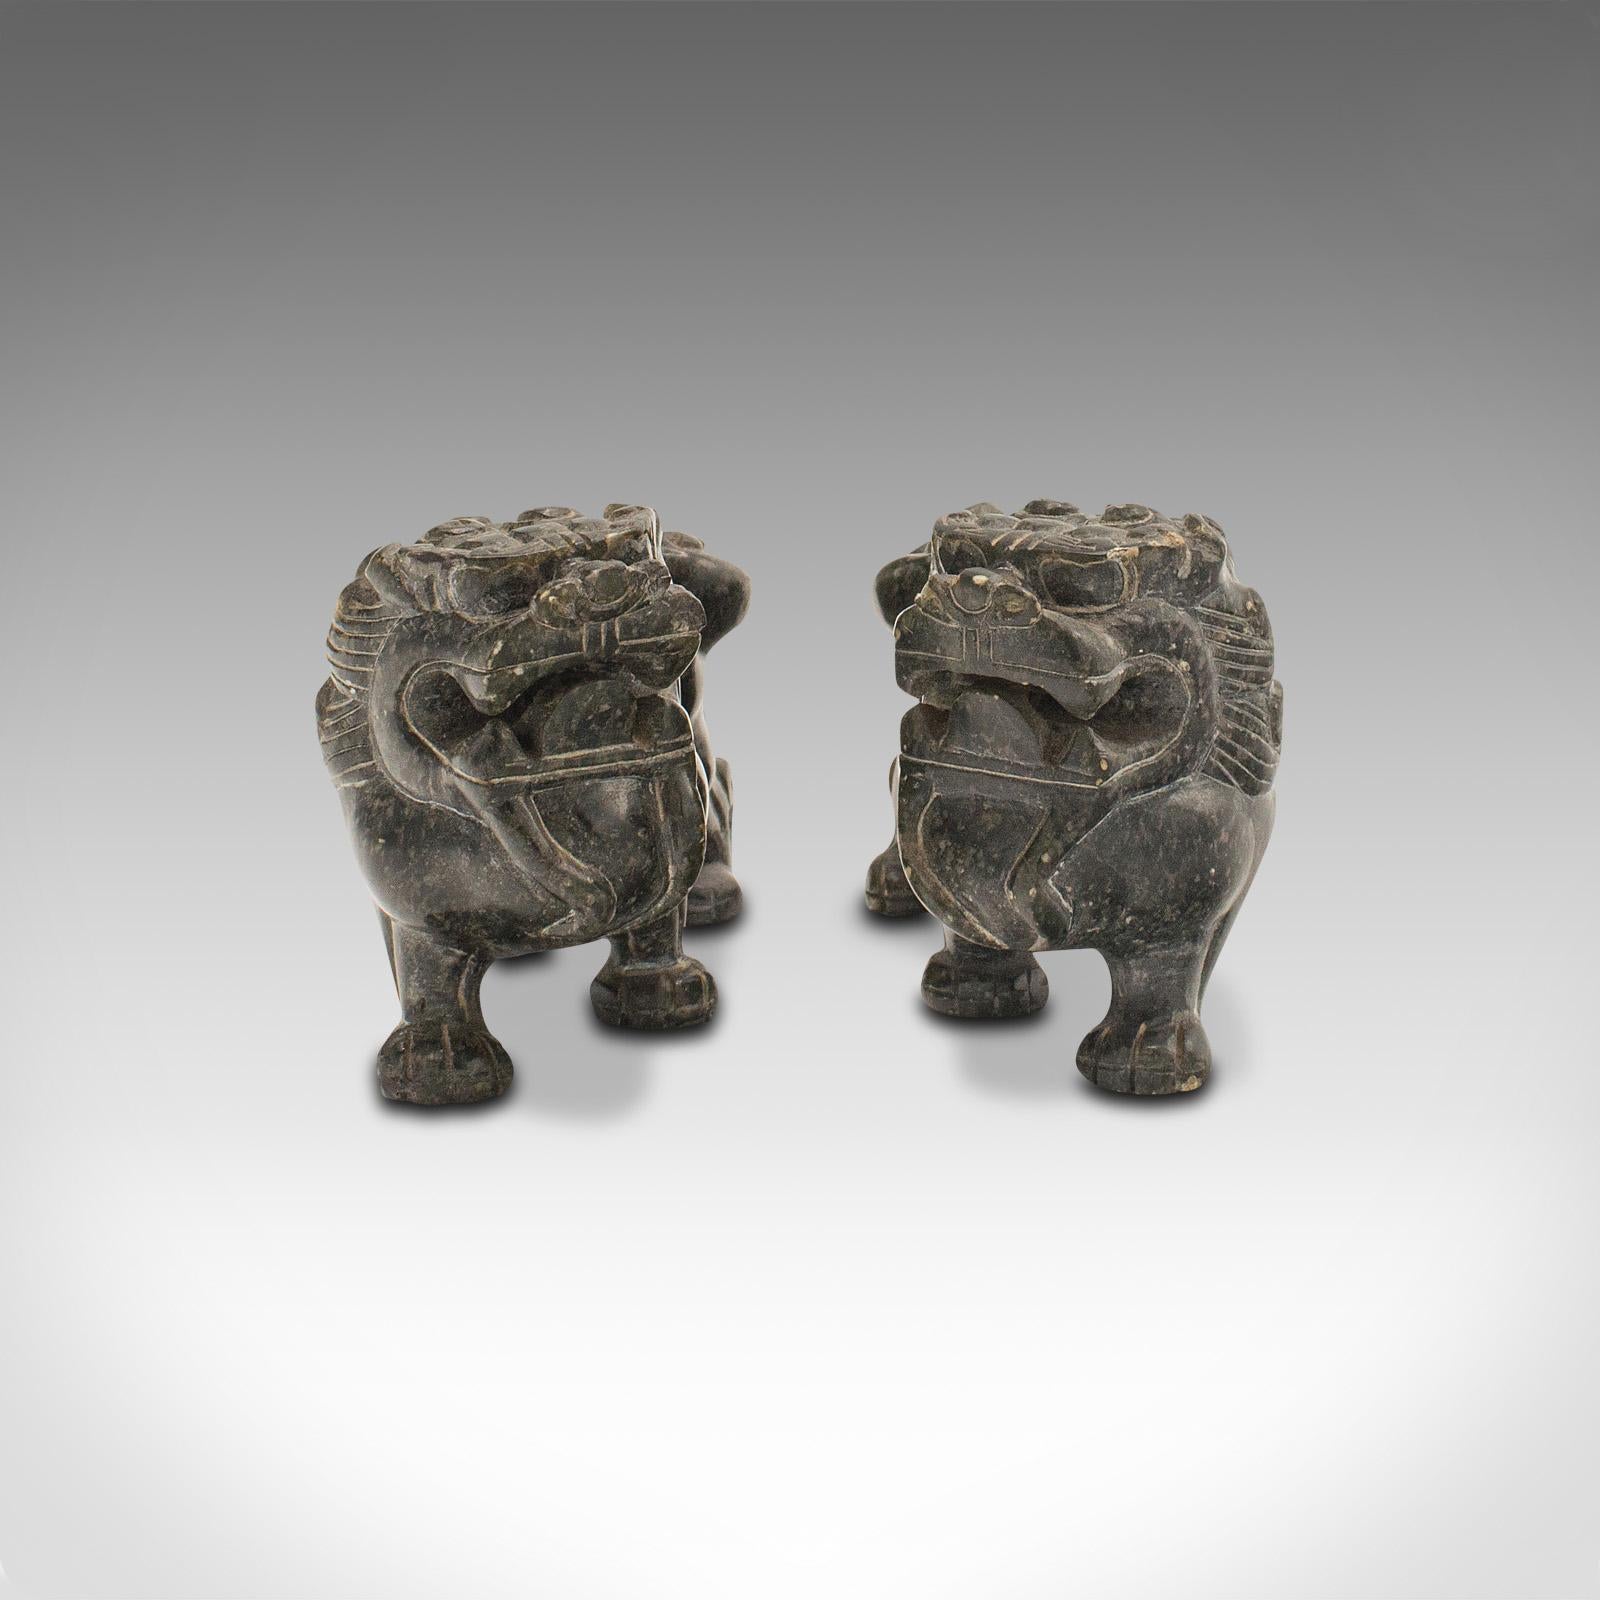 Our Stock # 18.8394

This is a pair of small vintage Oriental lions. A Chinese, soapstone carved figure, dating to the late Art Deco period, circa 1940.

Wonderfully tactile figures with abundant charm
Displays a desirable aged patina and in